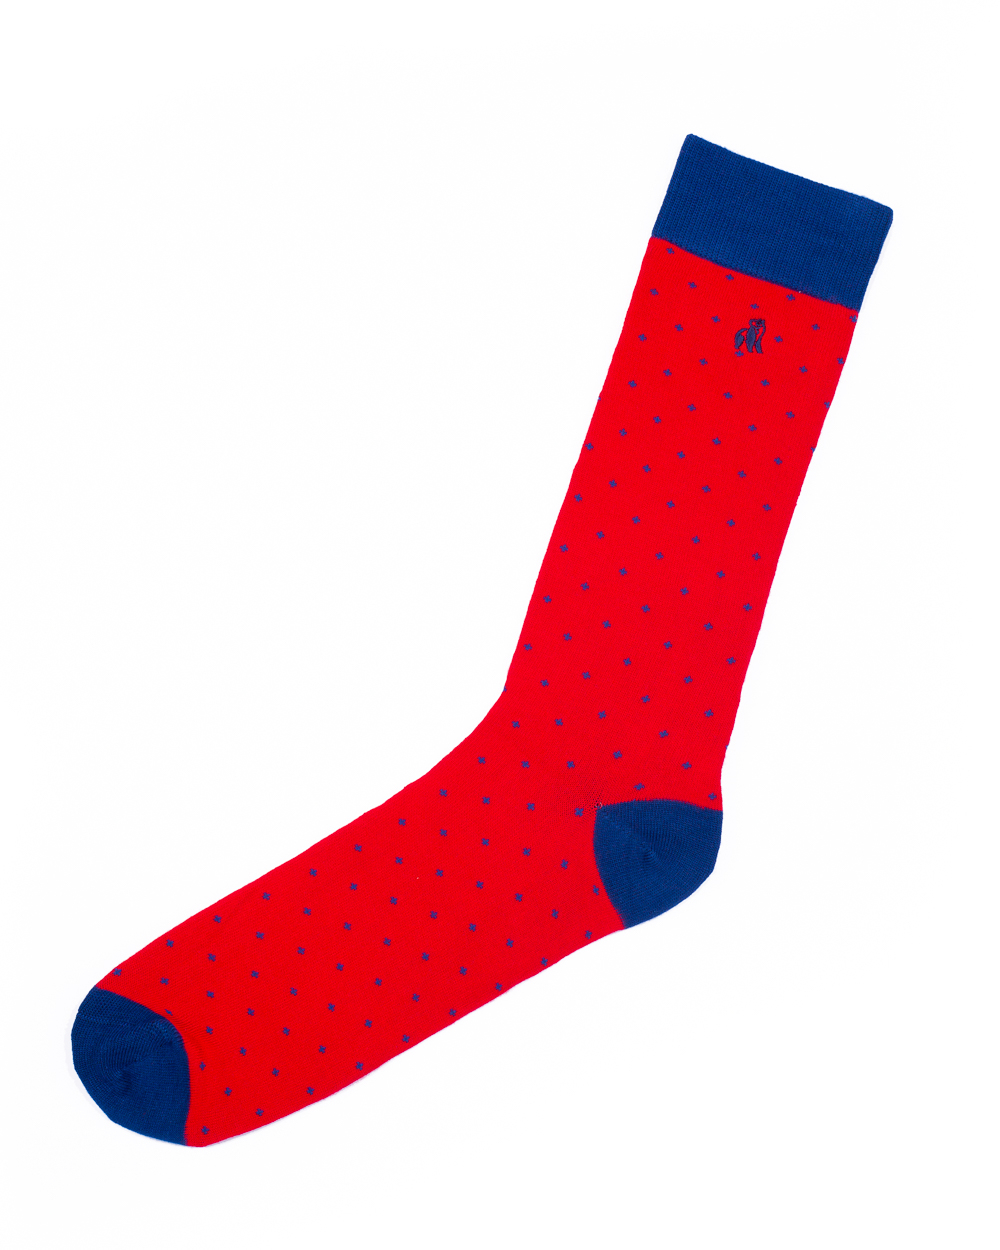 Swole Panda Bamboo Socks 1 Pair (spotted red)